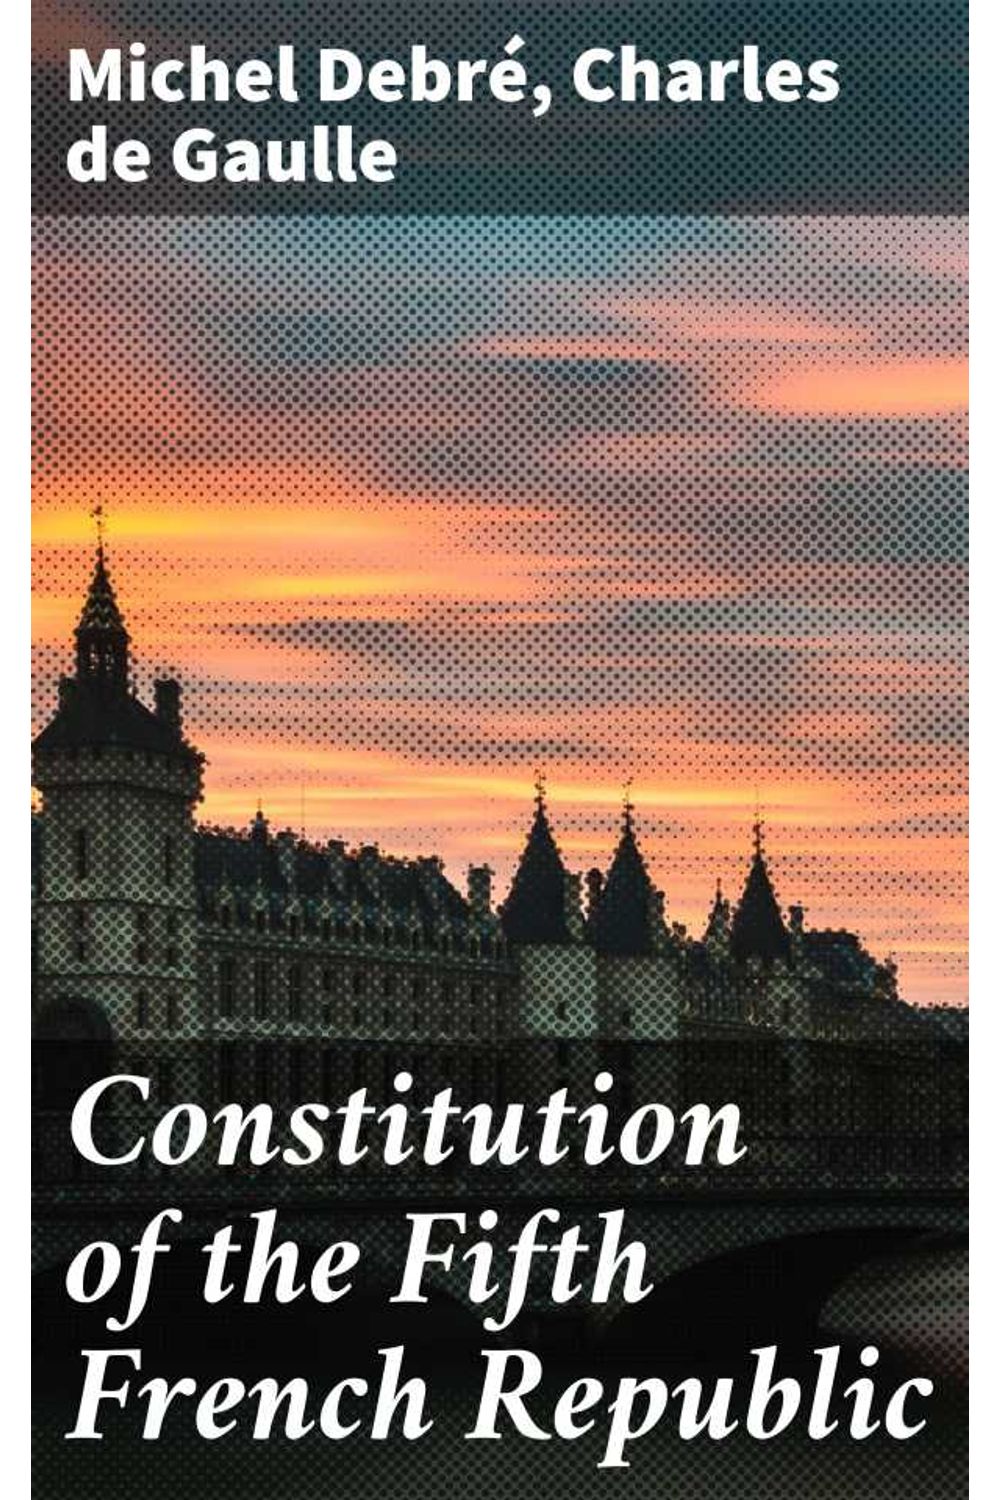 bw-constitution-of-the-fifth-french-republic-good-press-4064066456047